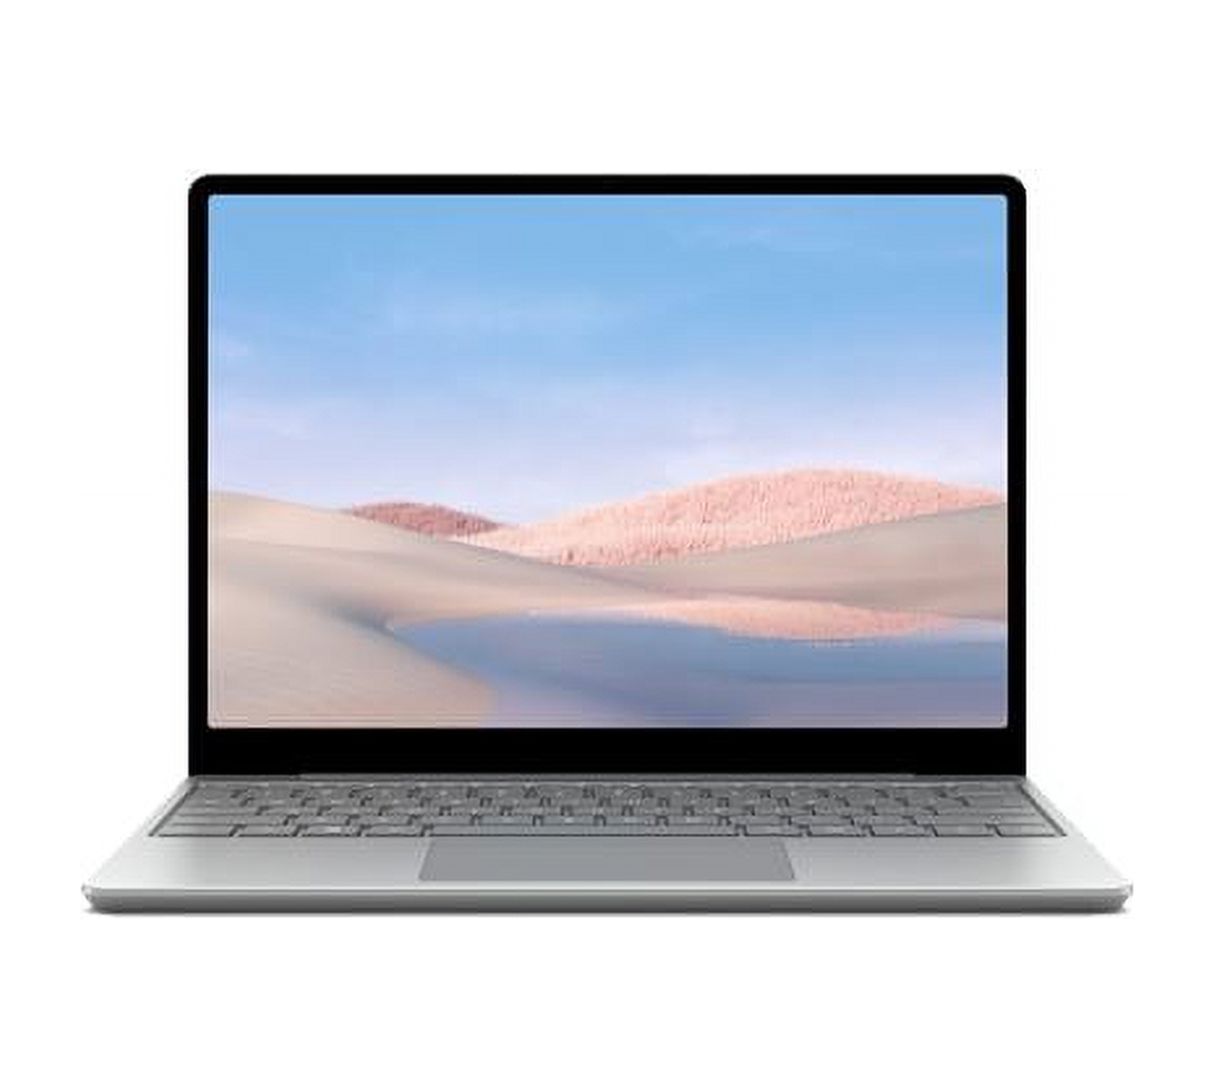 Microsoft Surface Laptop GO 1ZO-00001 12.4" Touch Notebook Intel Core i5 4GB Memory 64GB eMMC - image 1 of 3